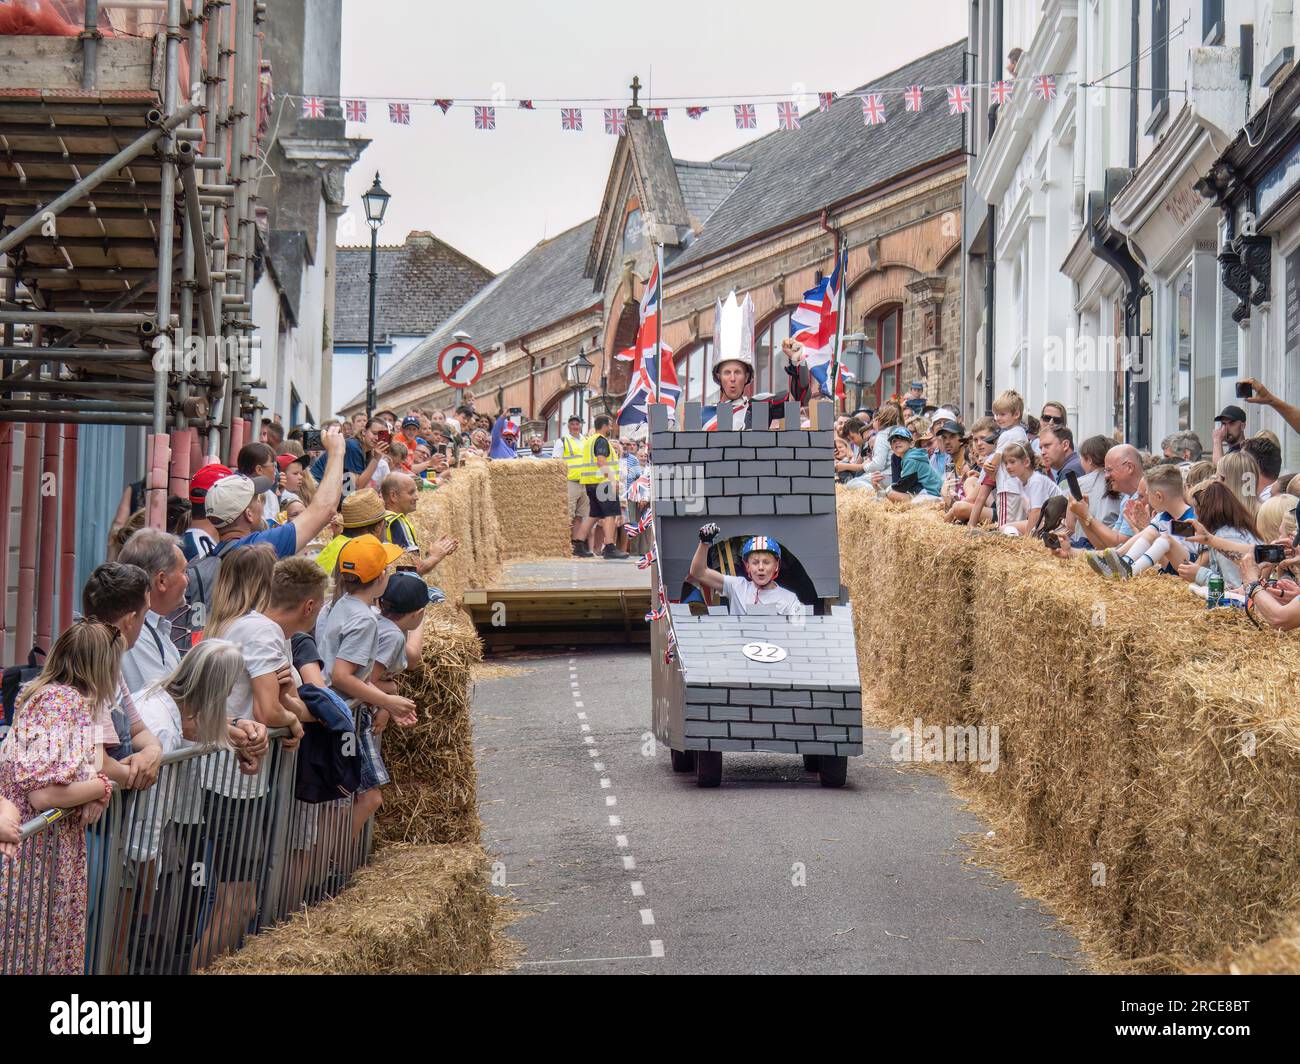 BIDEFORD, DEVON, ENGLAND - JUNE 18 2023: Participants in the annual Soapbox Derby fun race event in the town. Stock Photo